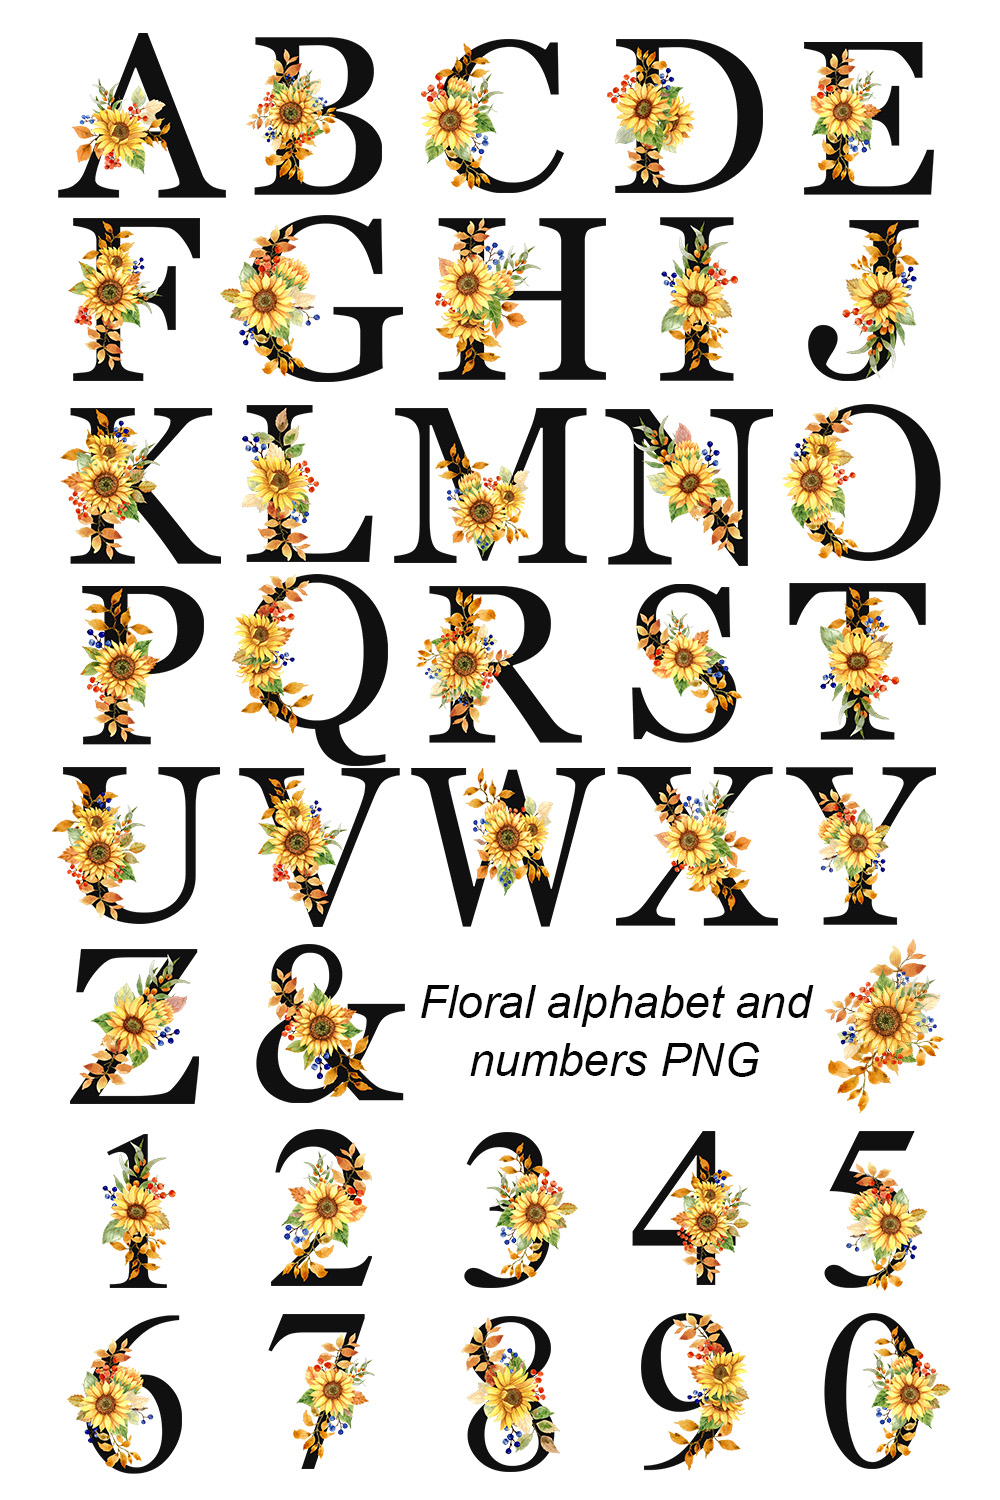 Floral and Golden Alphabet and Numbers pinterest image.